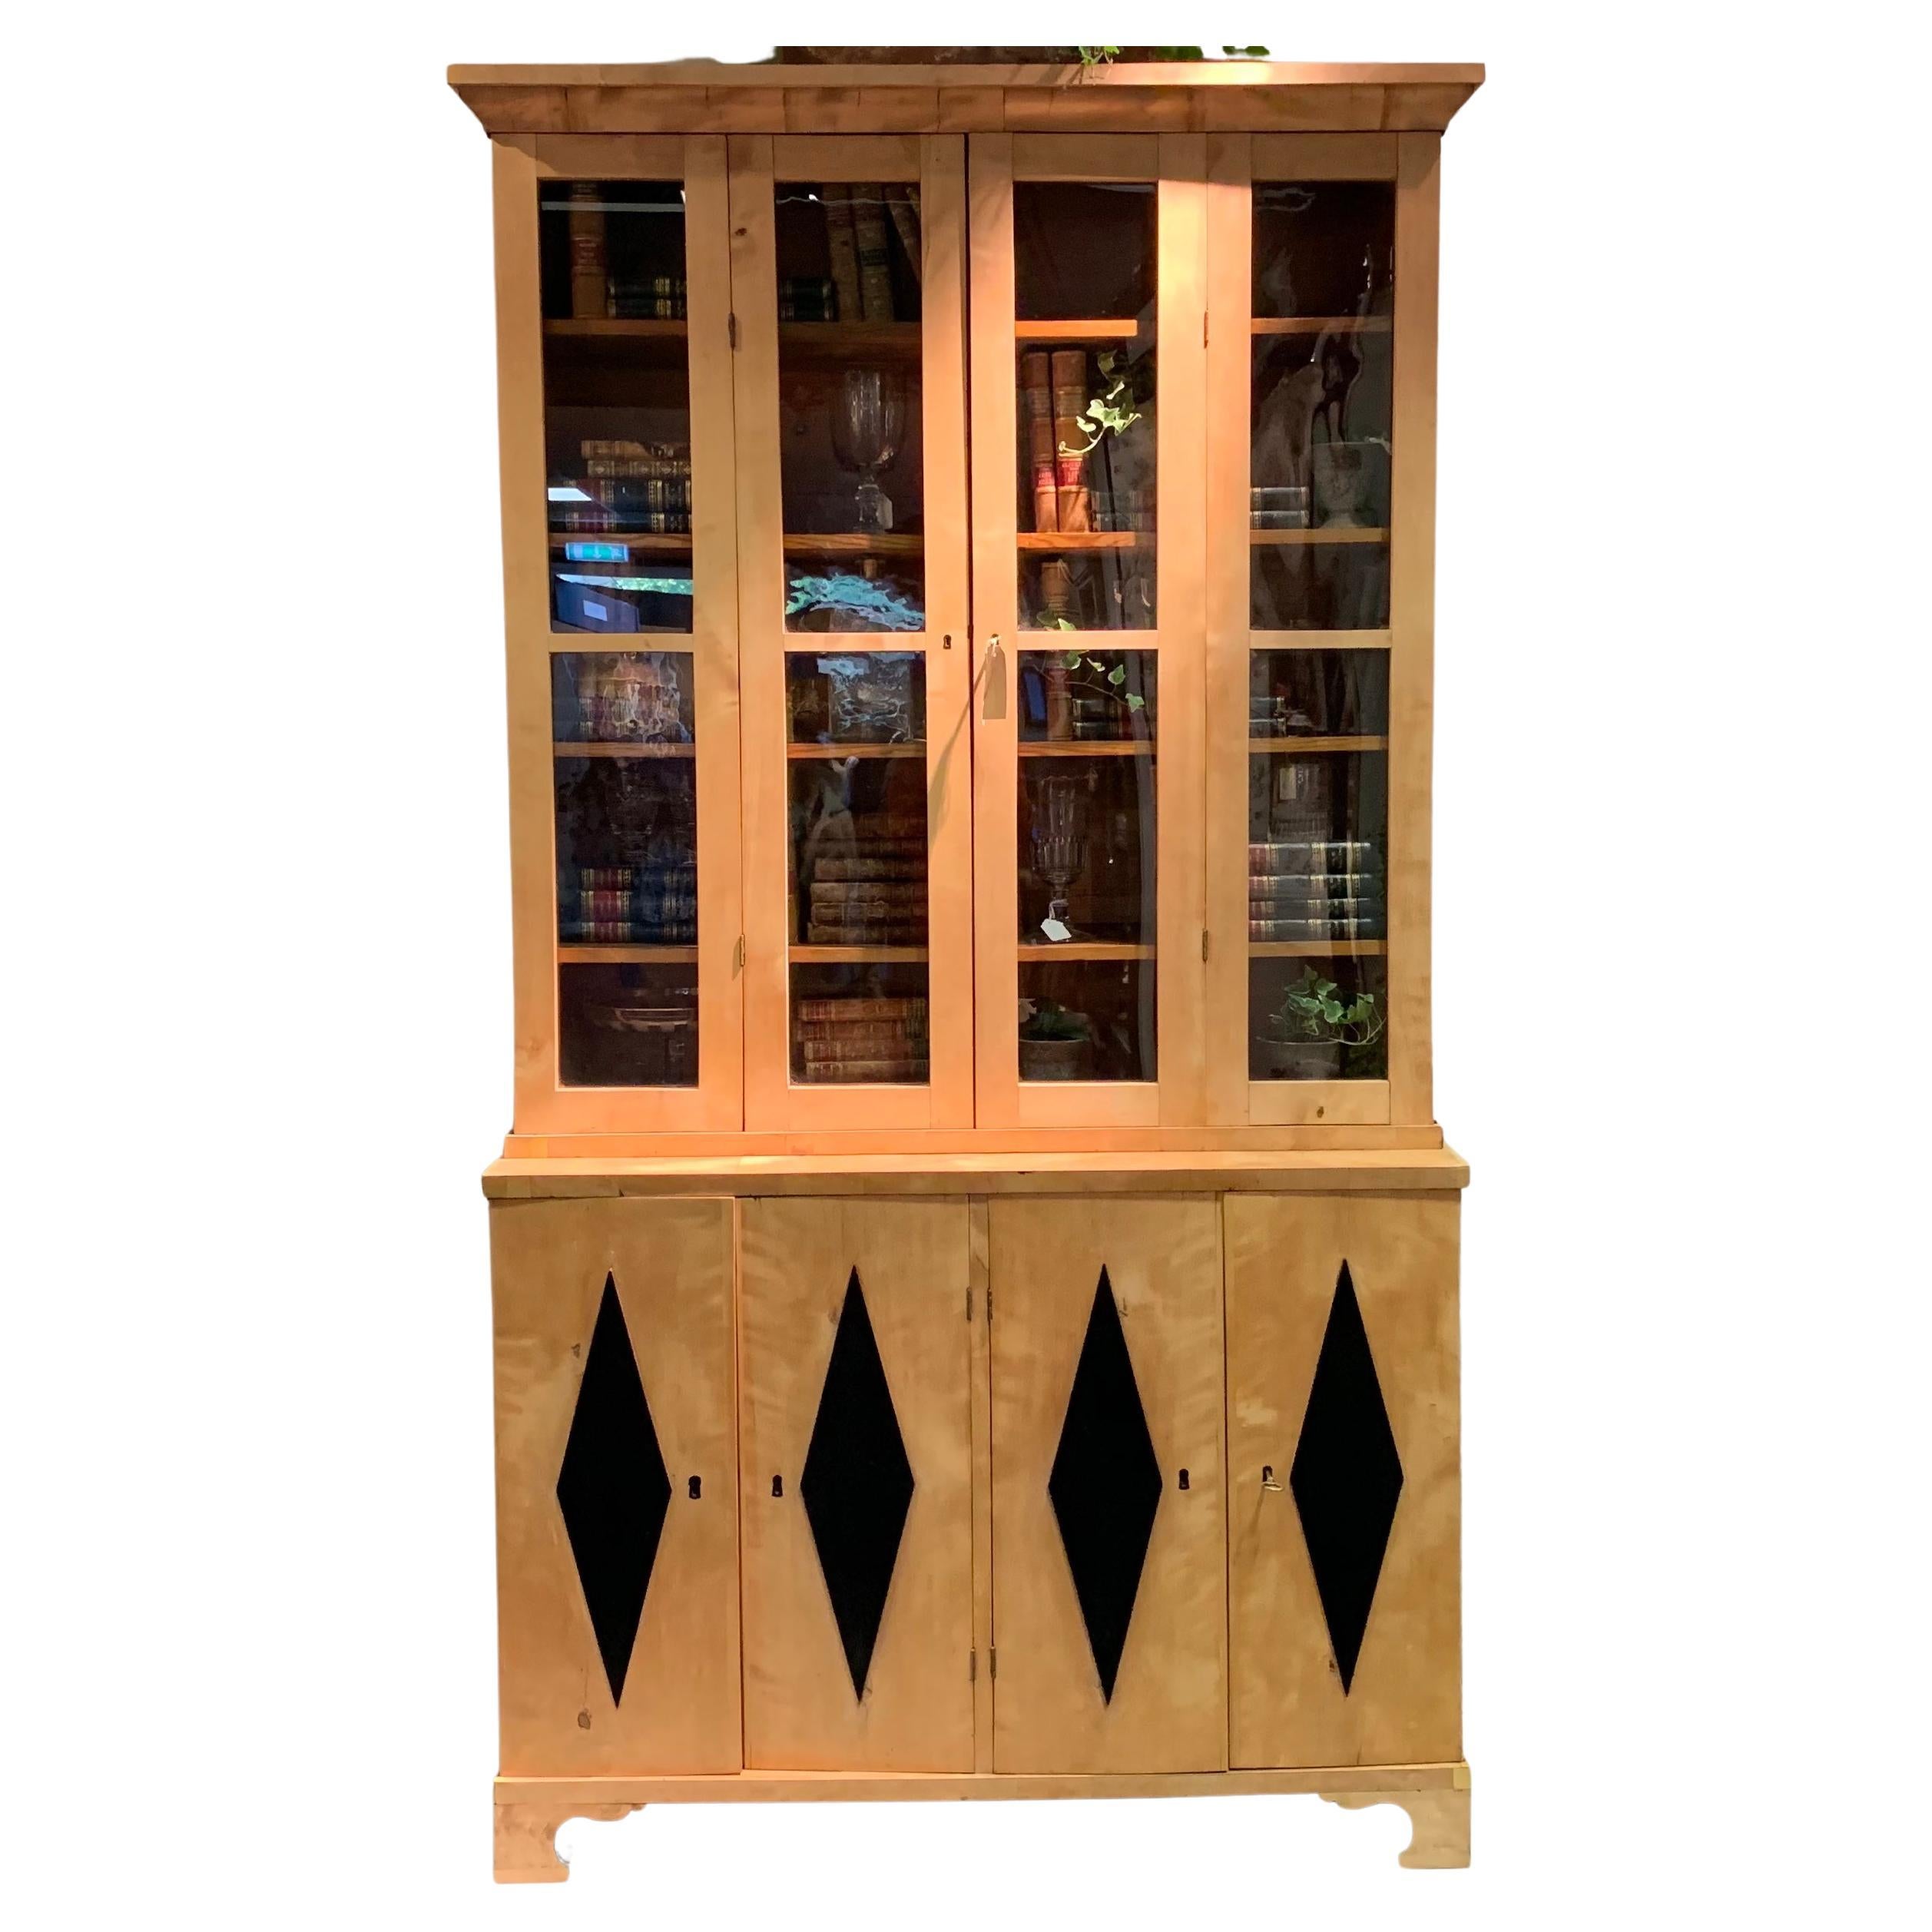 C19th Bookcase from Sweden with glazed top and decorative diamond detail to base